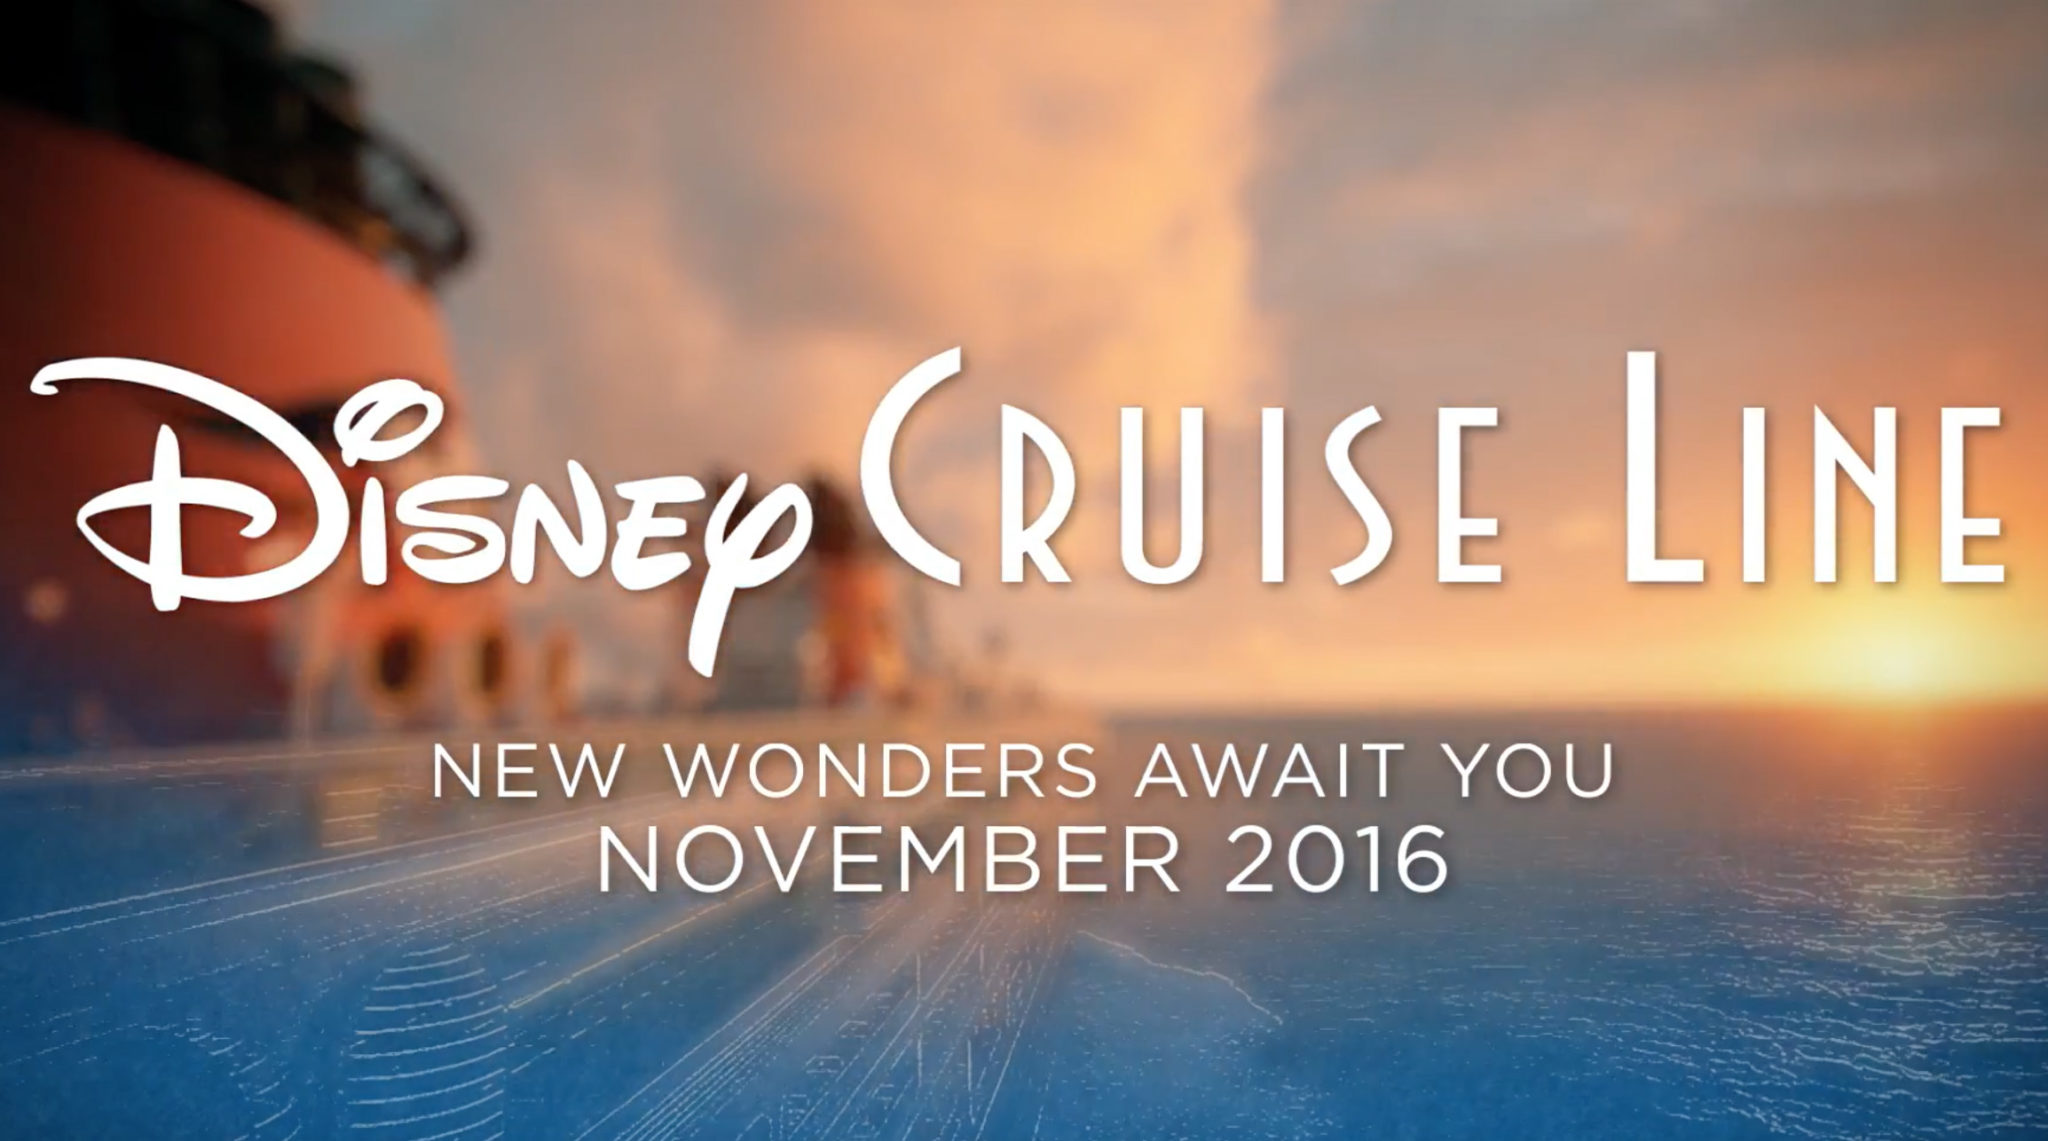 Disney Wonder to Receive Some new Magical Enhancements